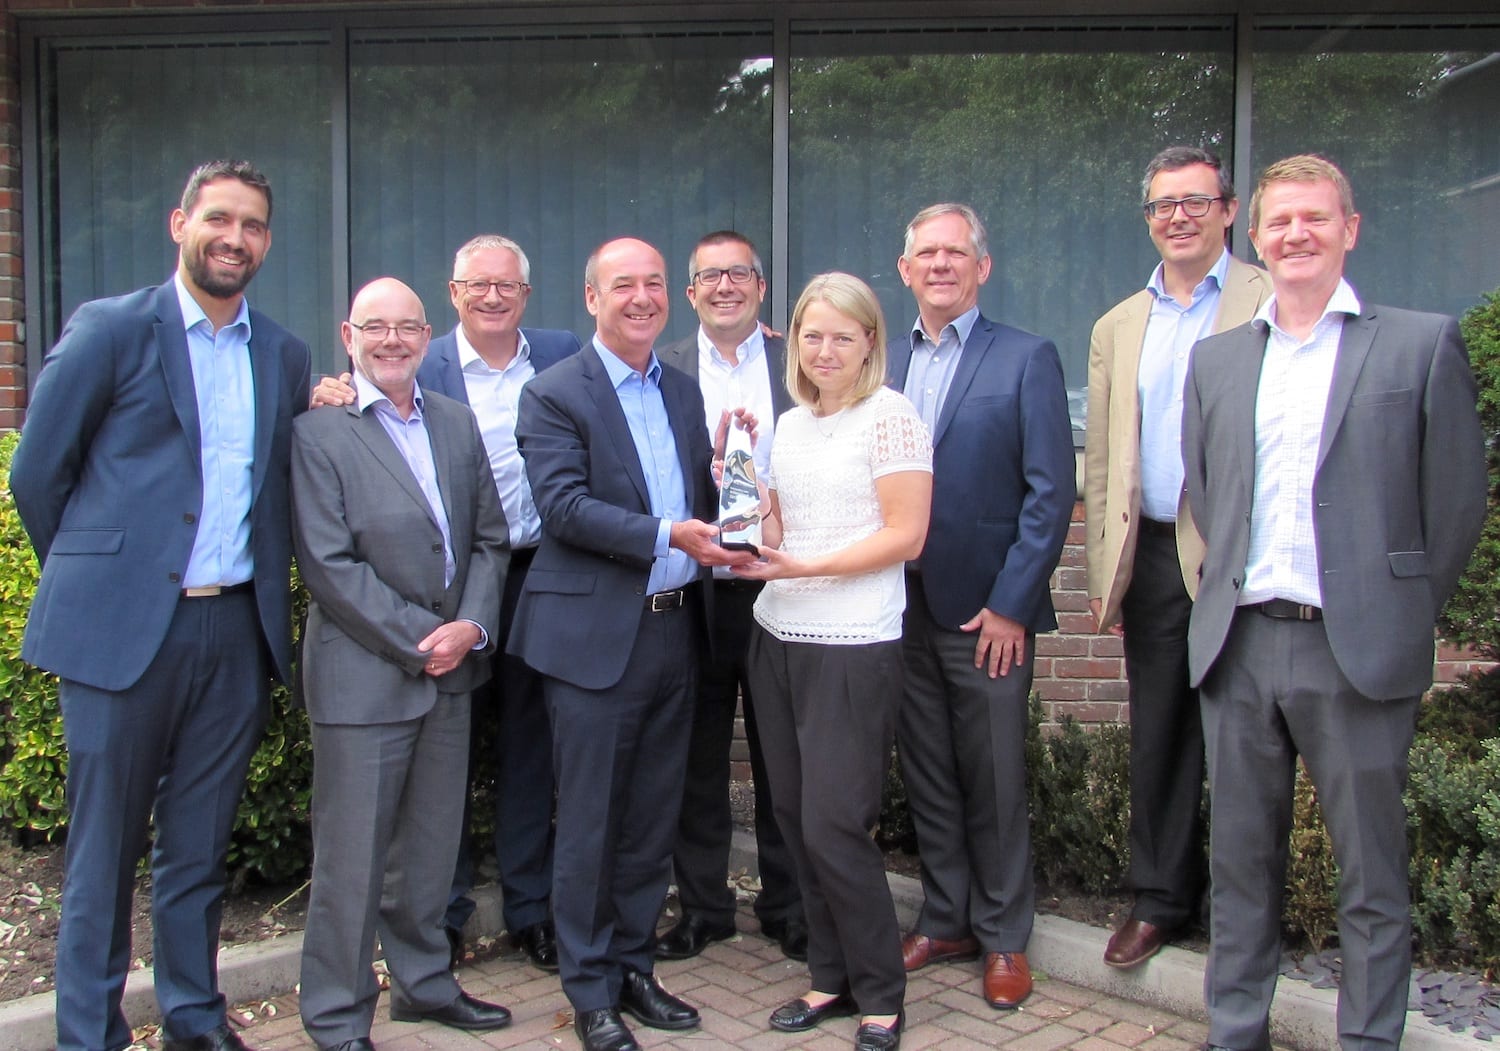 Harwin presented Avnet Abacus with its annual Sales Excellence Award in recognition of its strong commercial performance and productivity.